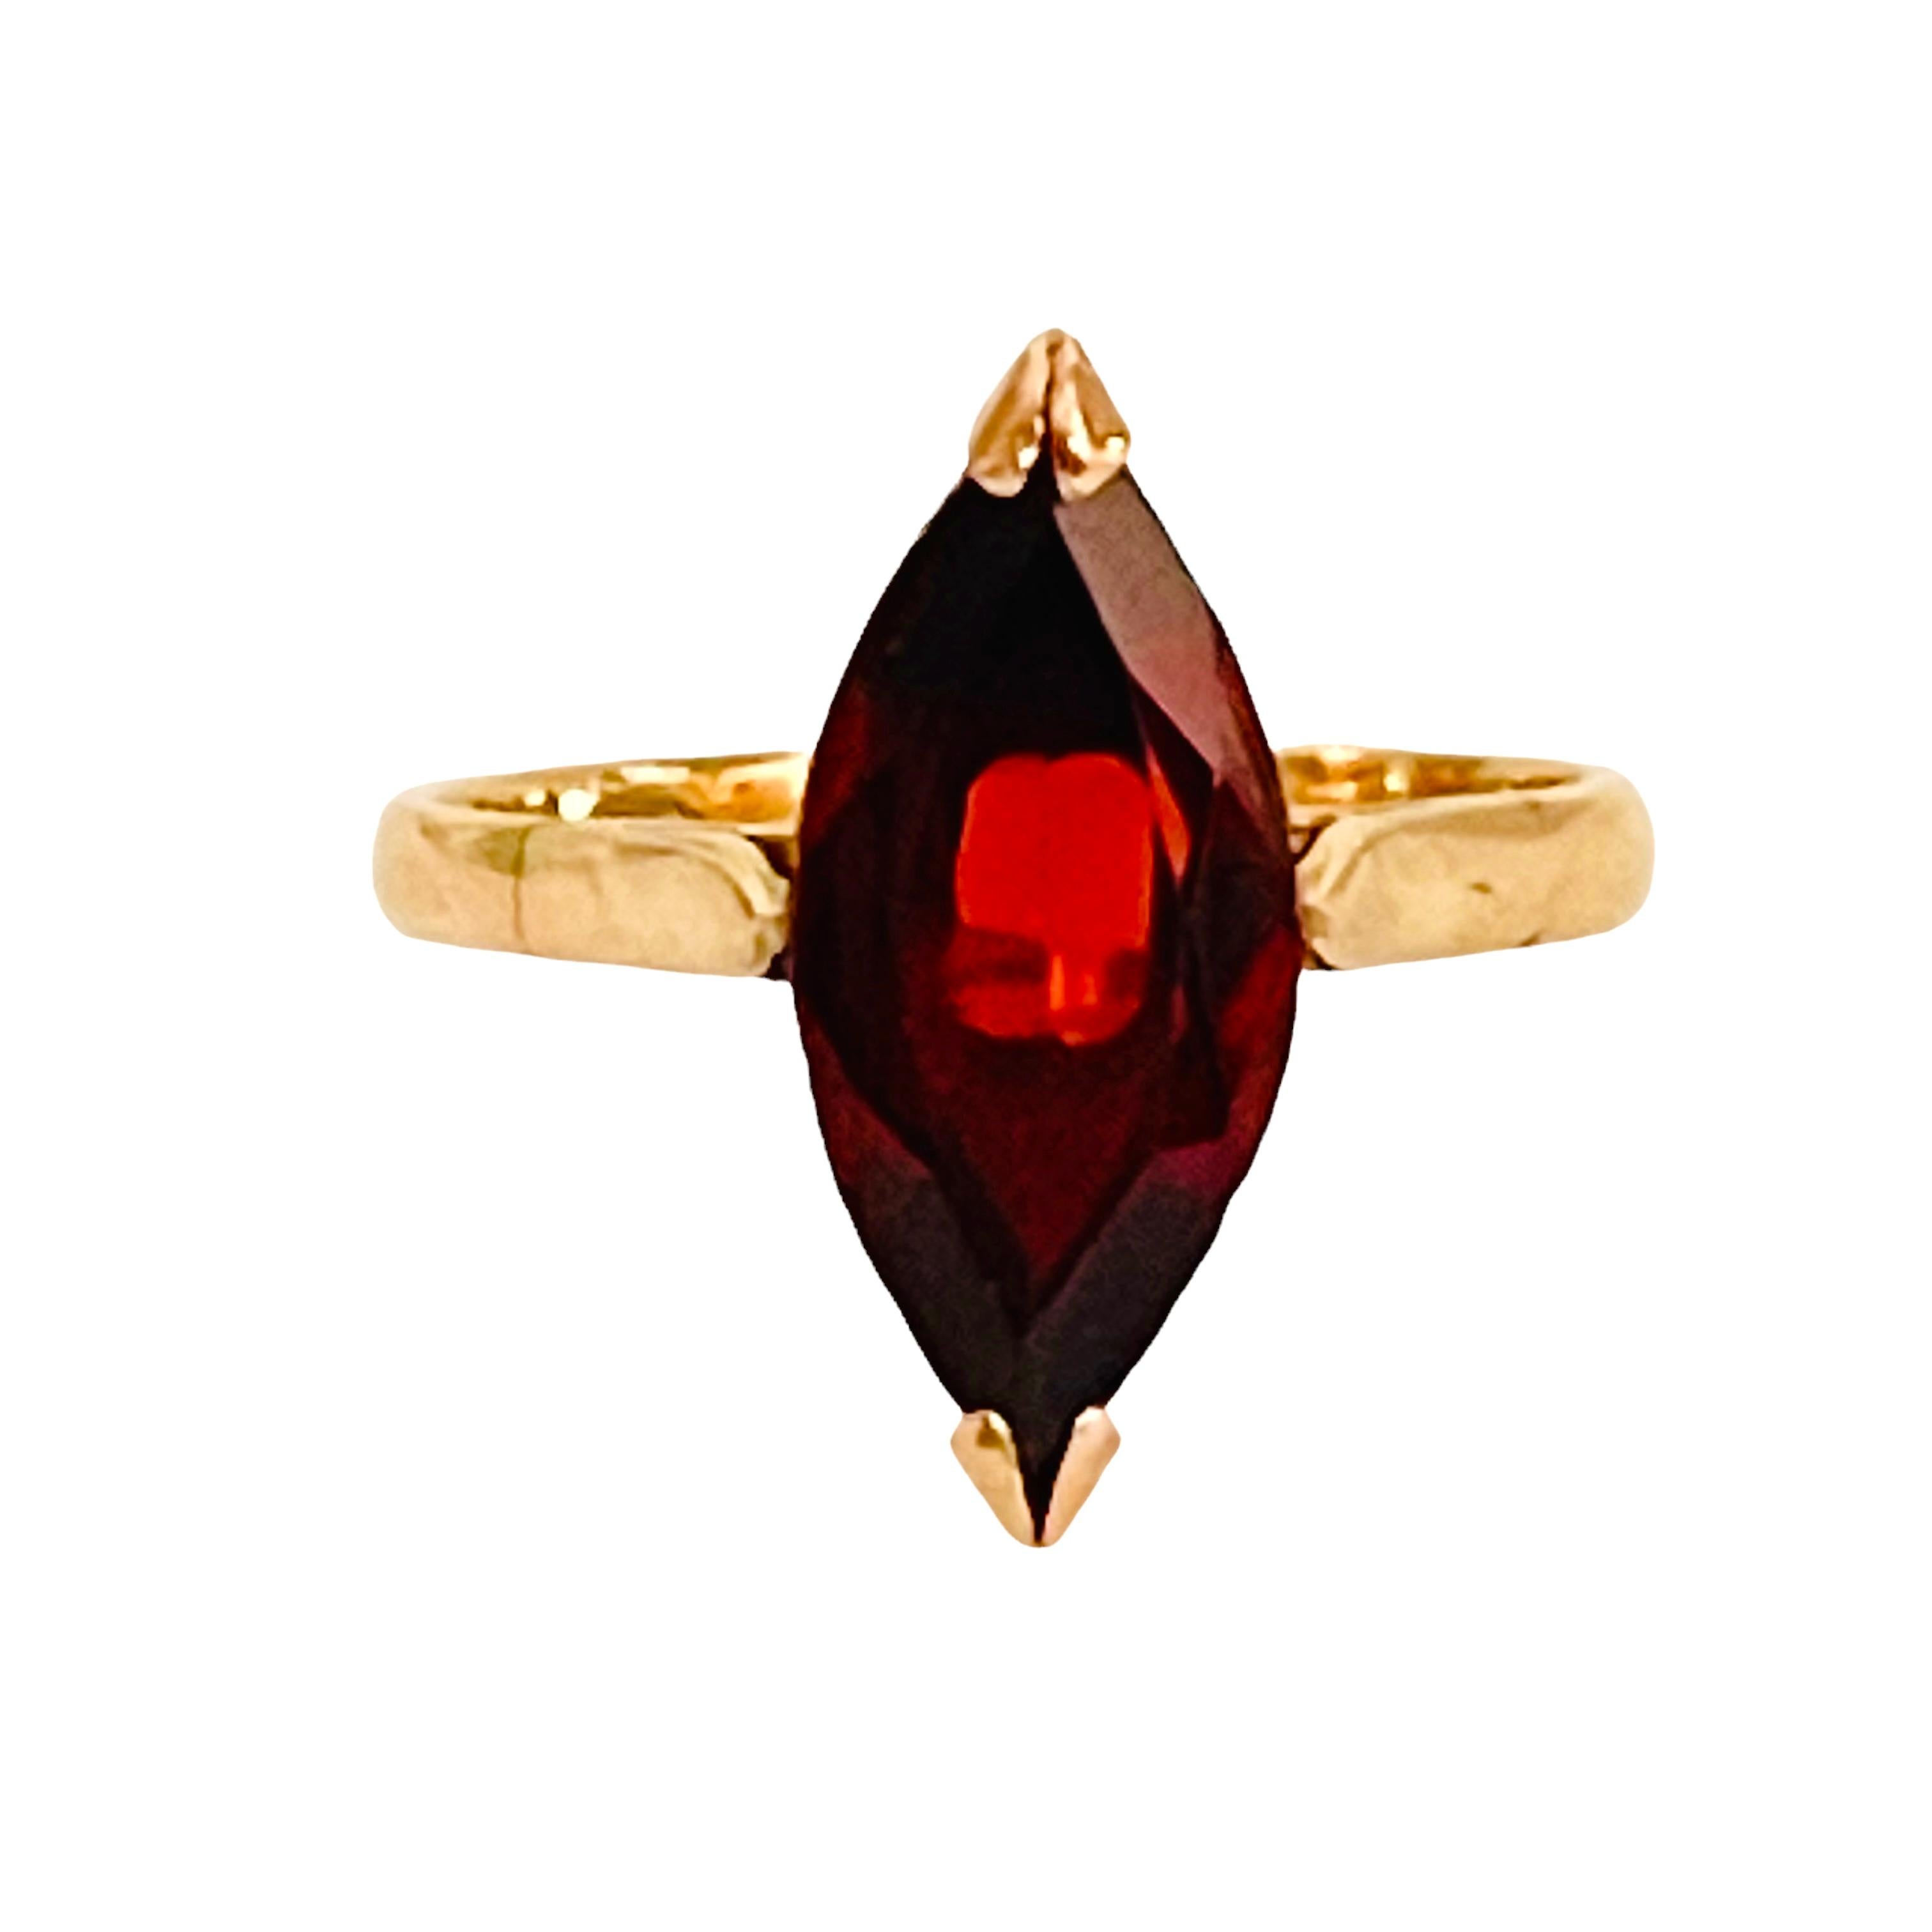 Art Deco 14K Yellow Gold Marquise Cut Garnet Ring with Appraisal